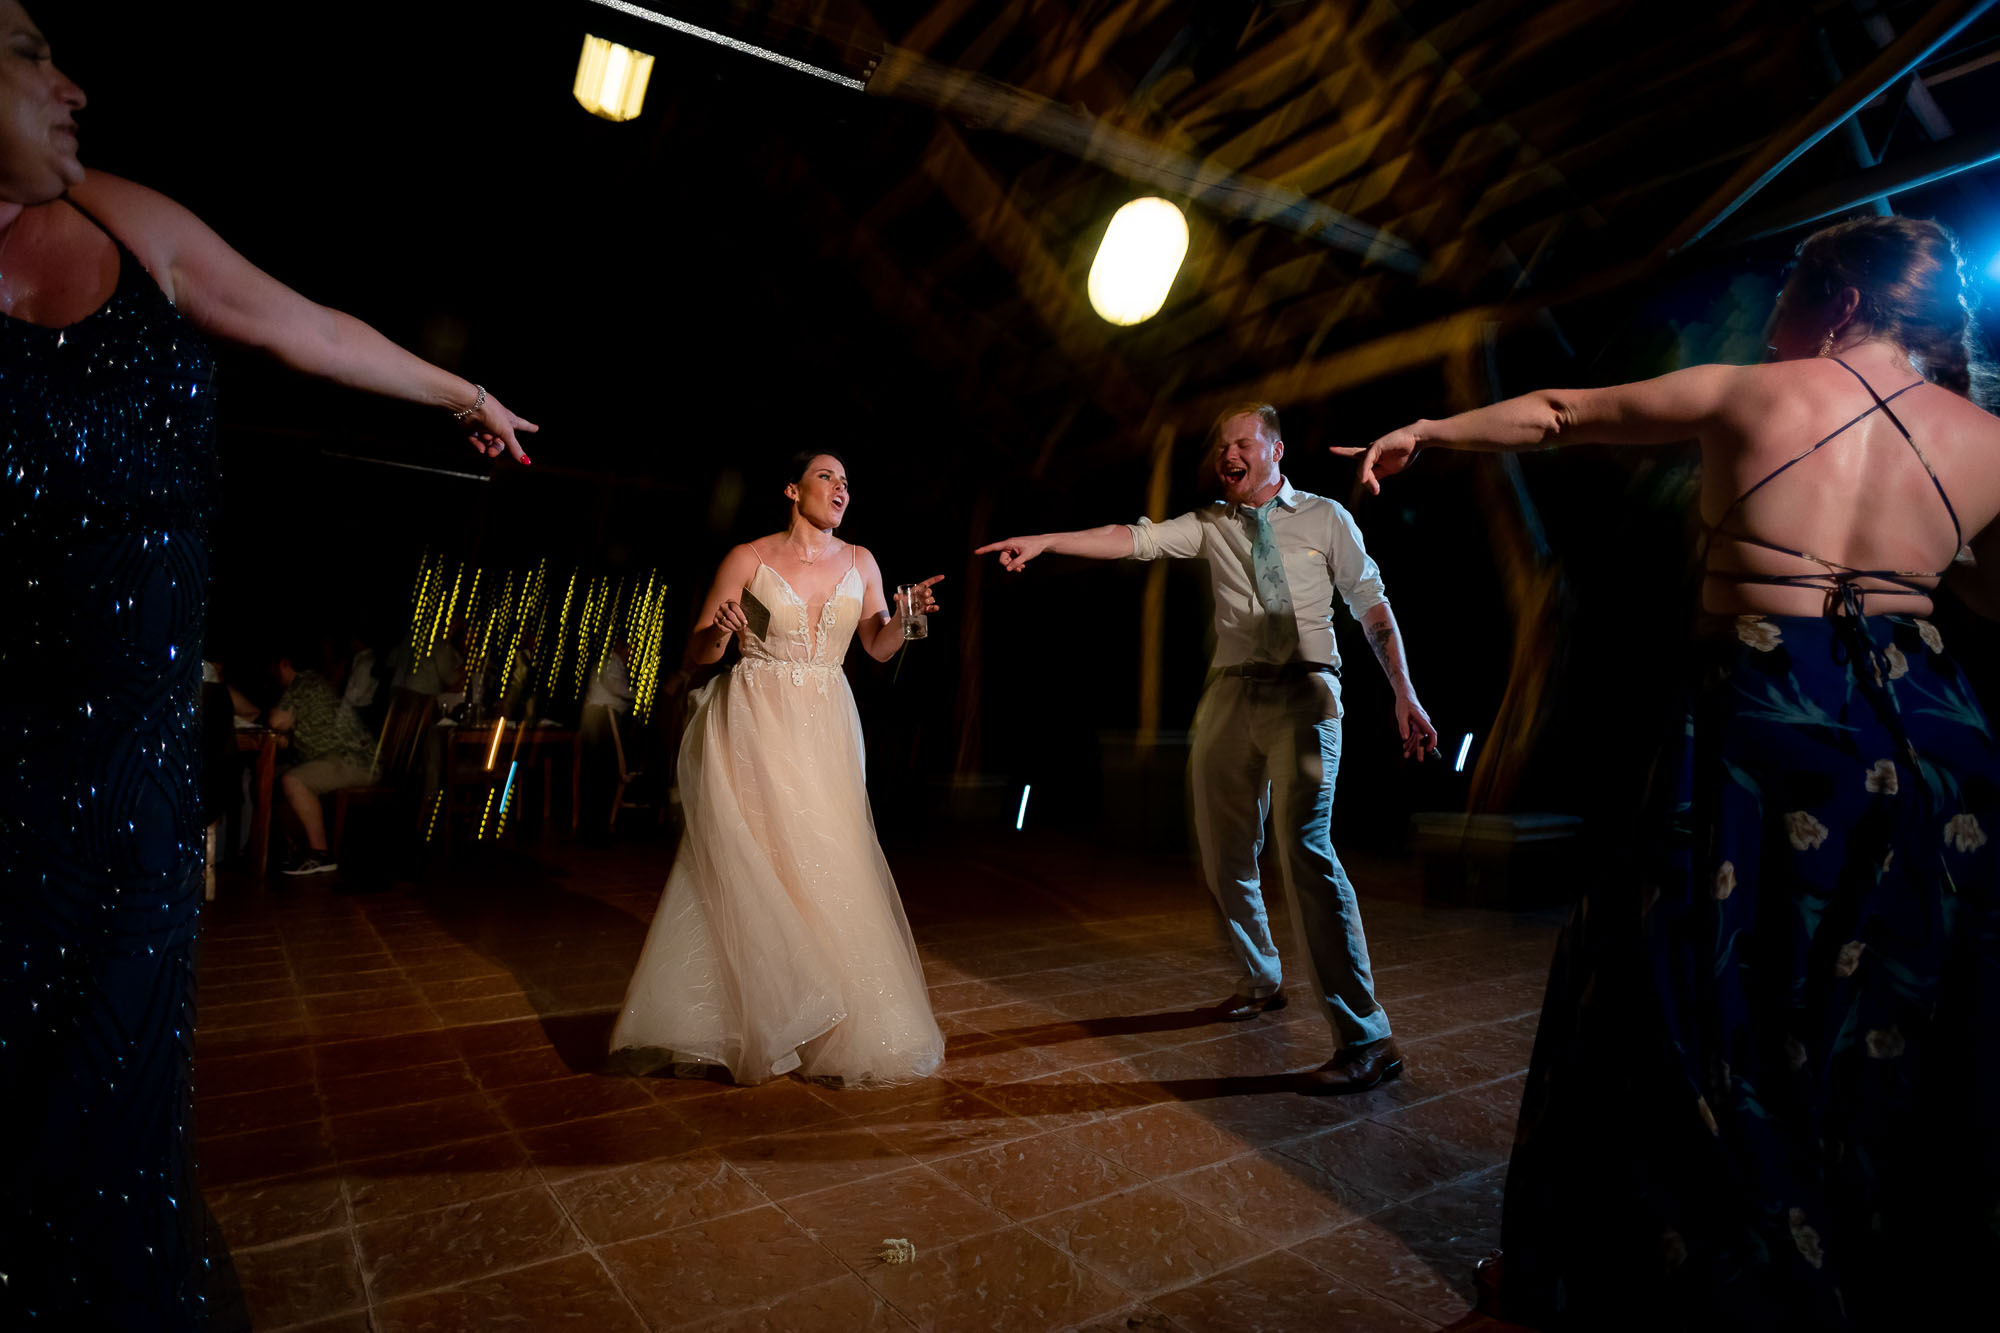 The bride dancing with guests